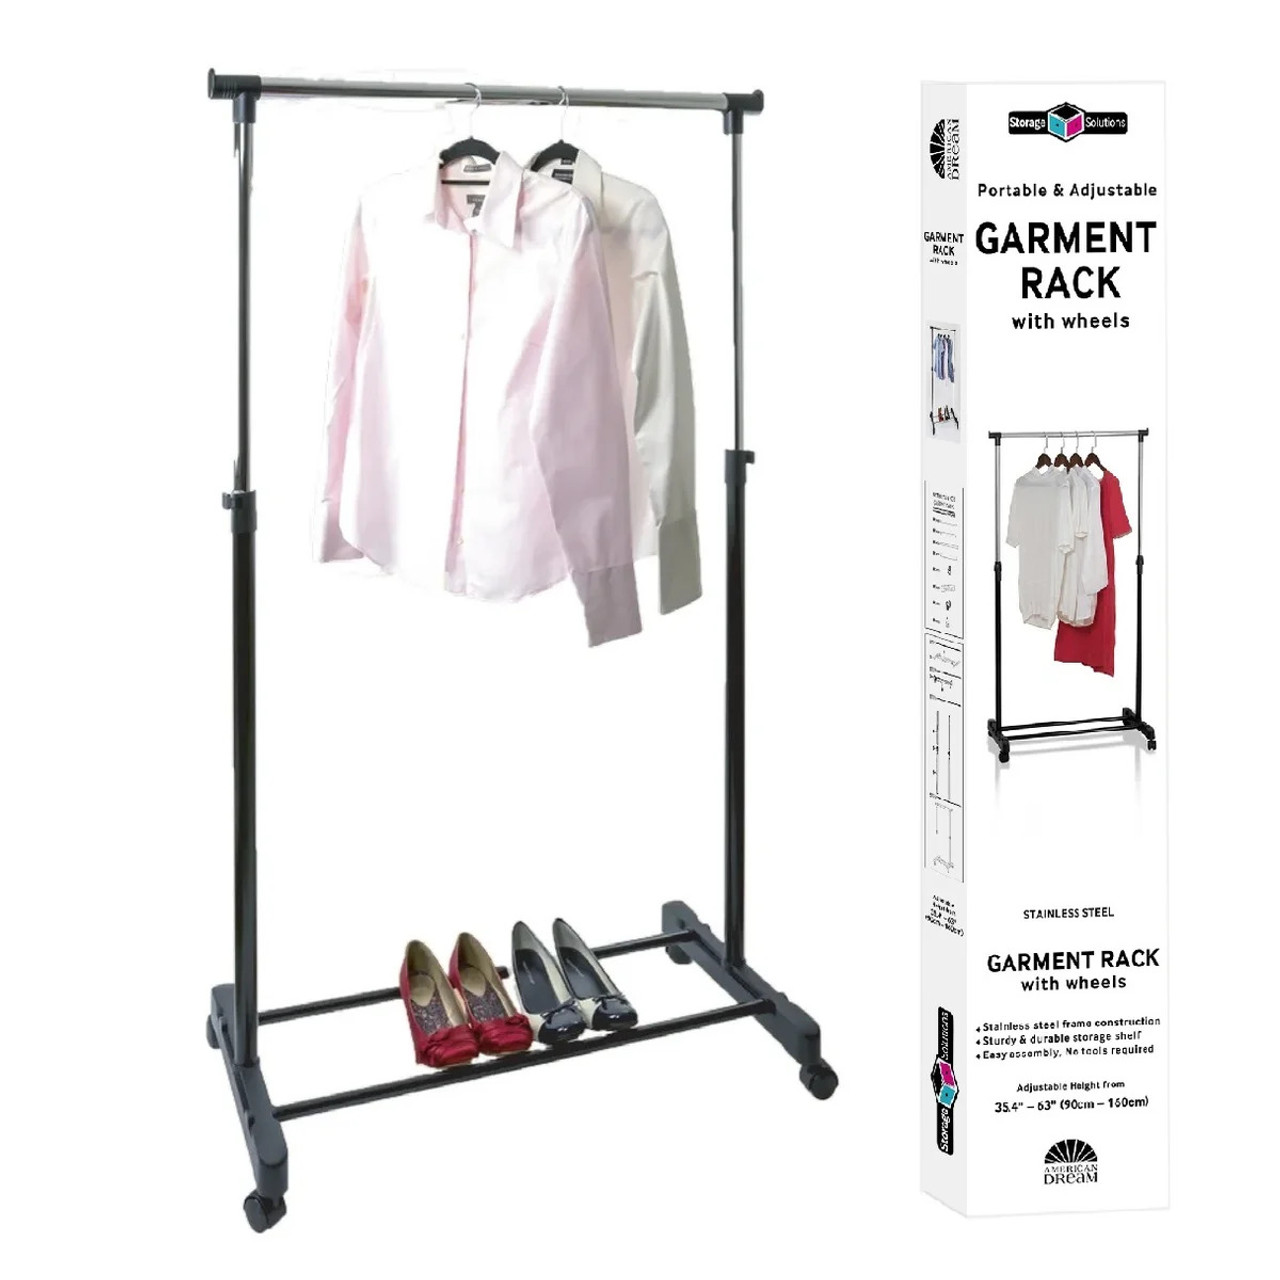 Portable & Adjustable Stainless Steel Garment Rack with Wheels product image